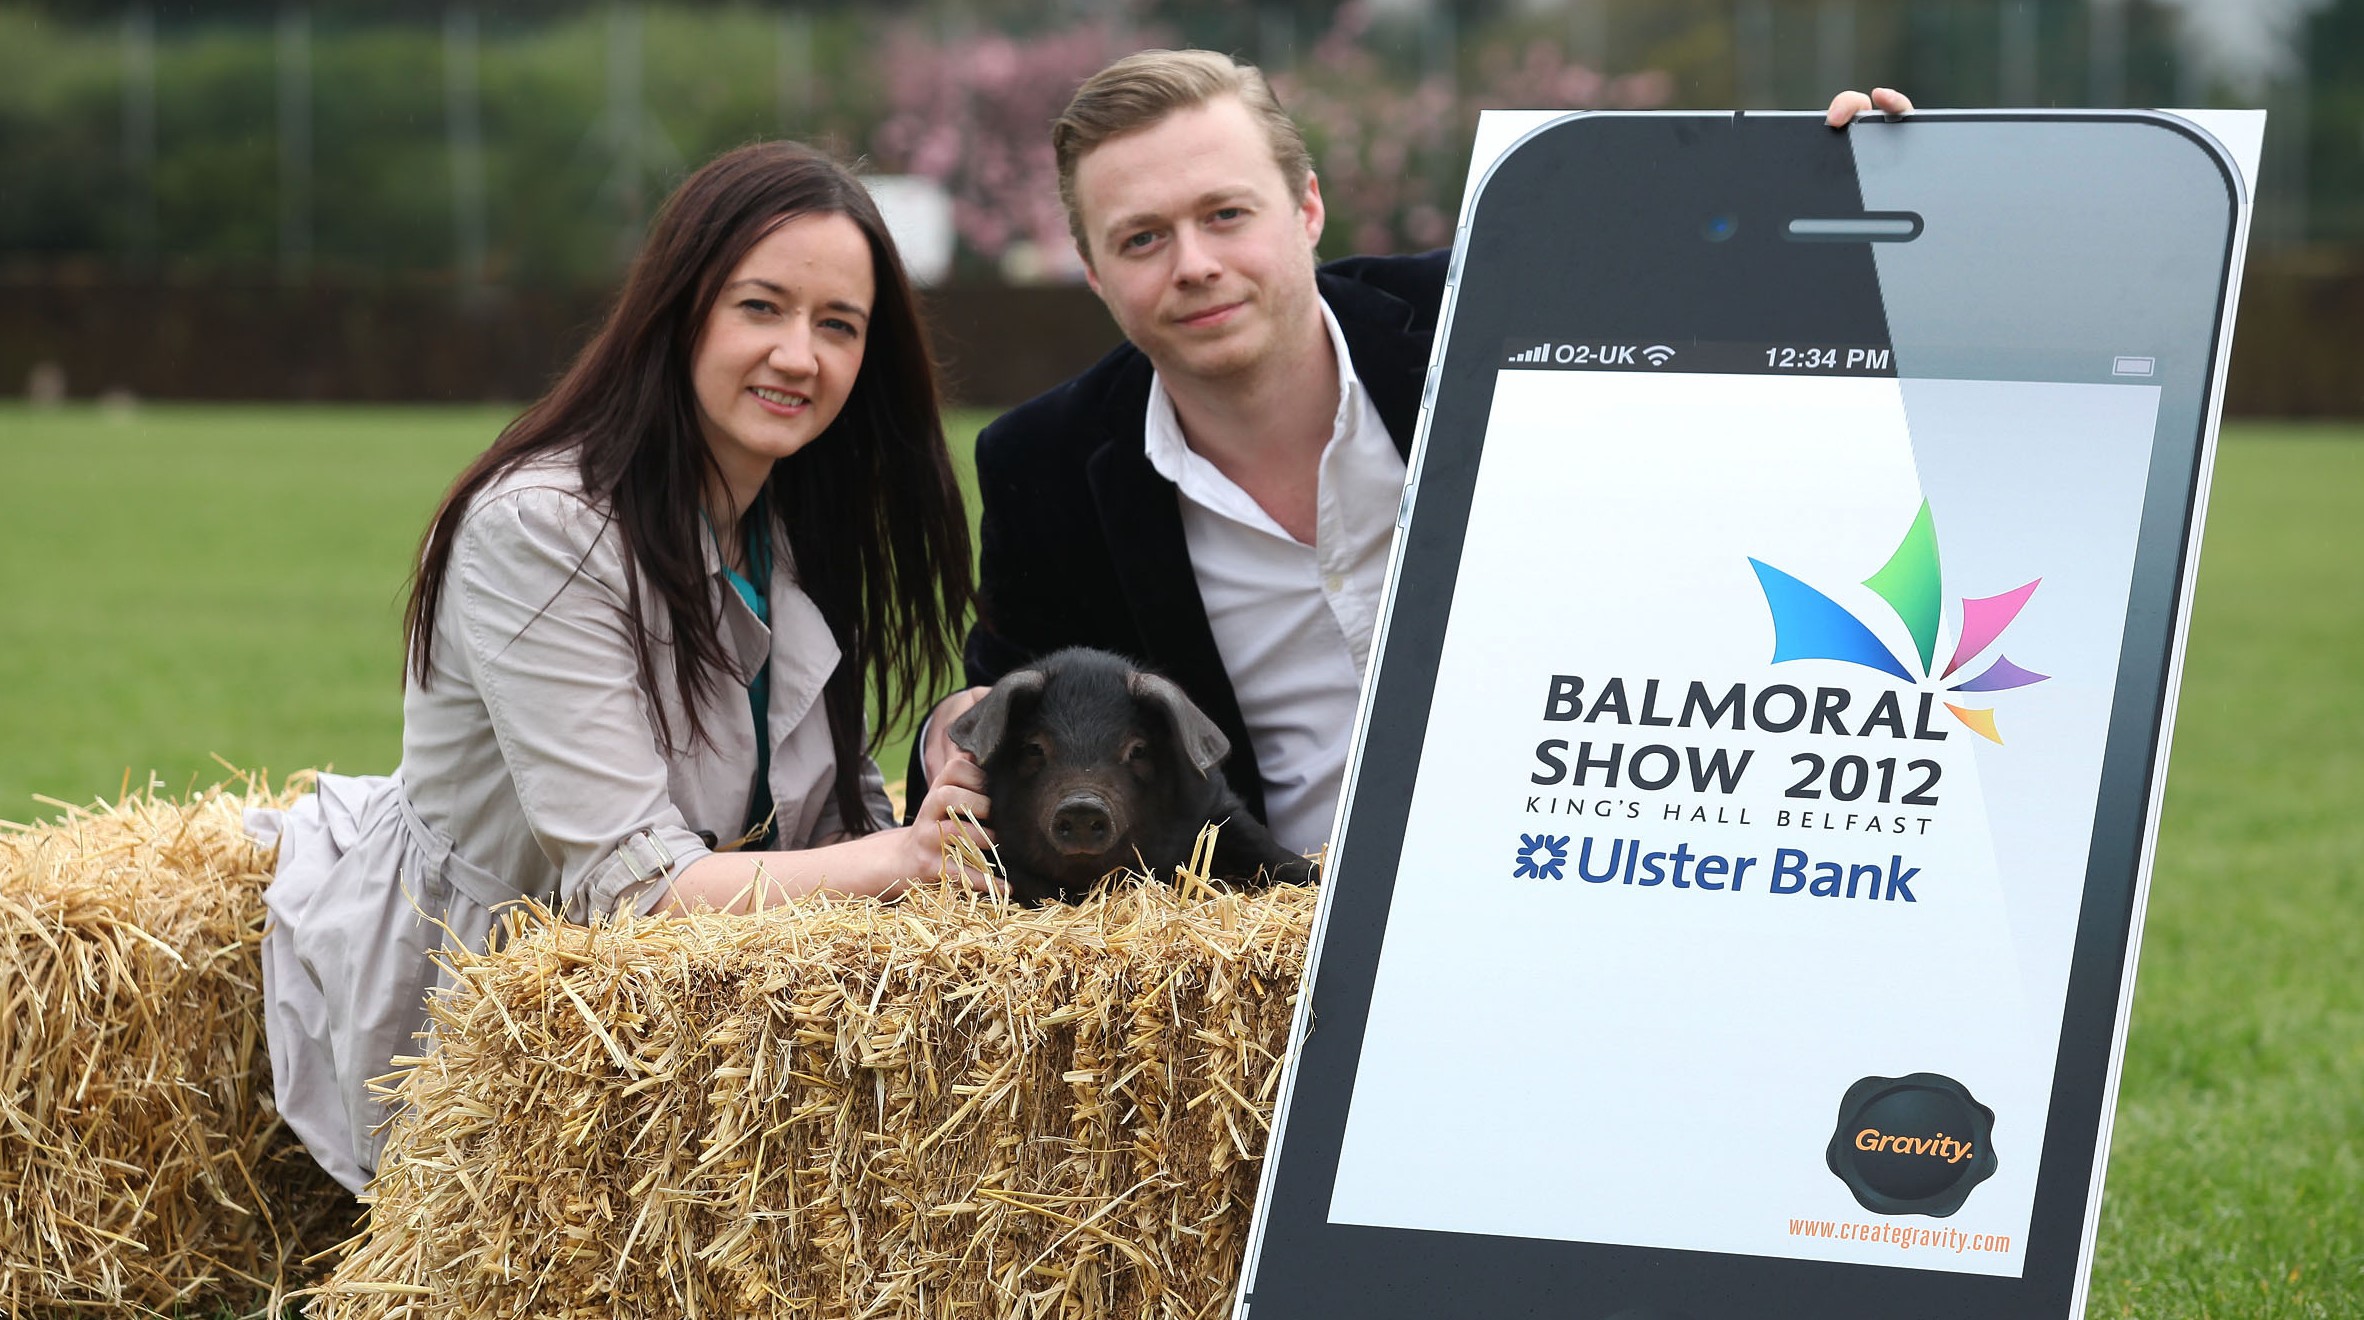 ‘Appy’ Days as Gravity ploughs new furrow at Balmoral Show